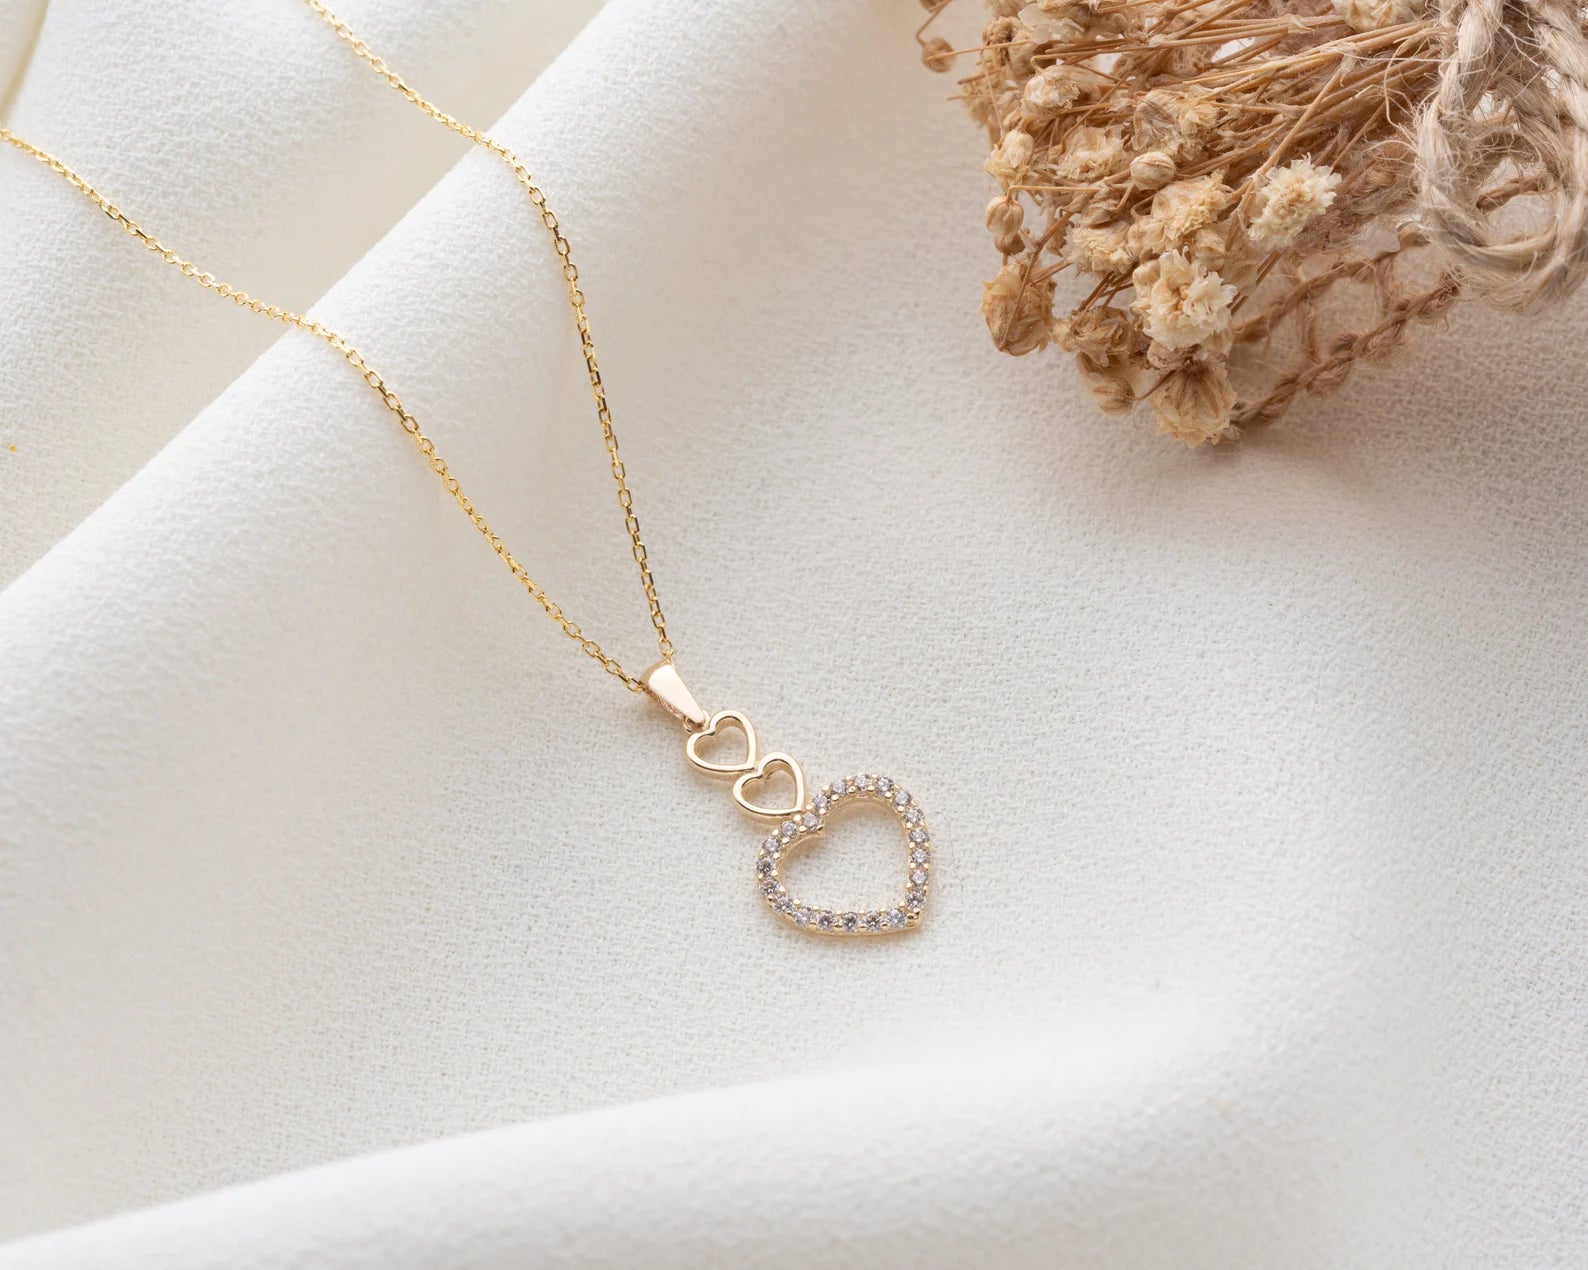 14K Solid Gold Dainty Heart Necklace